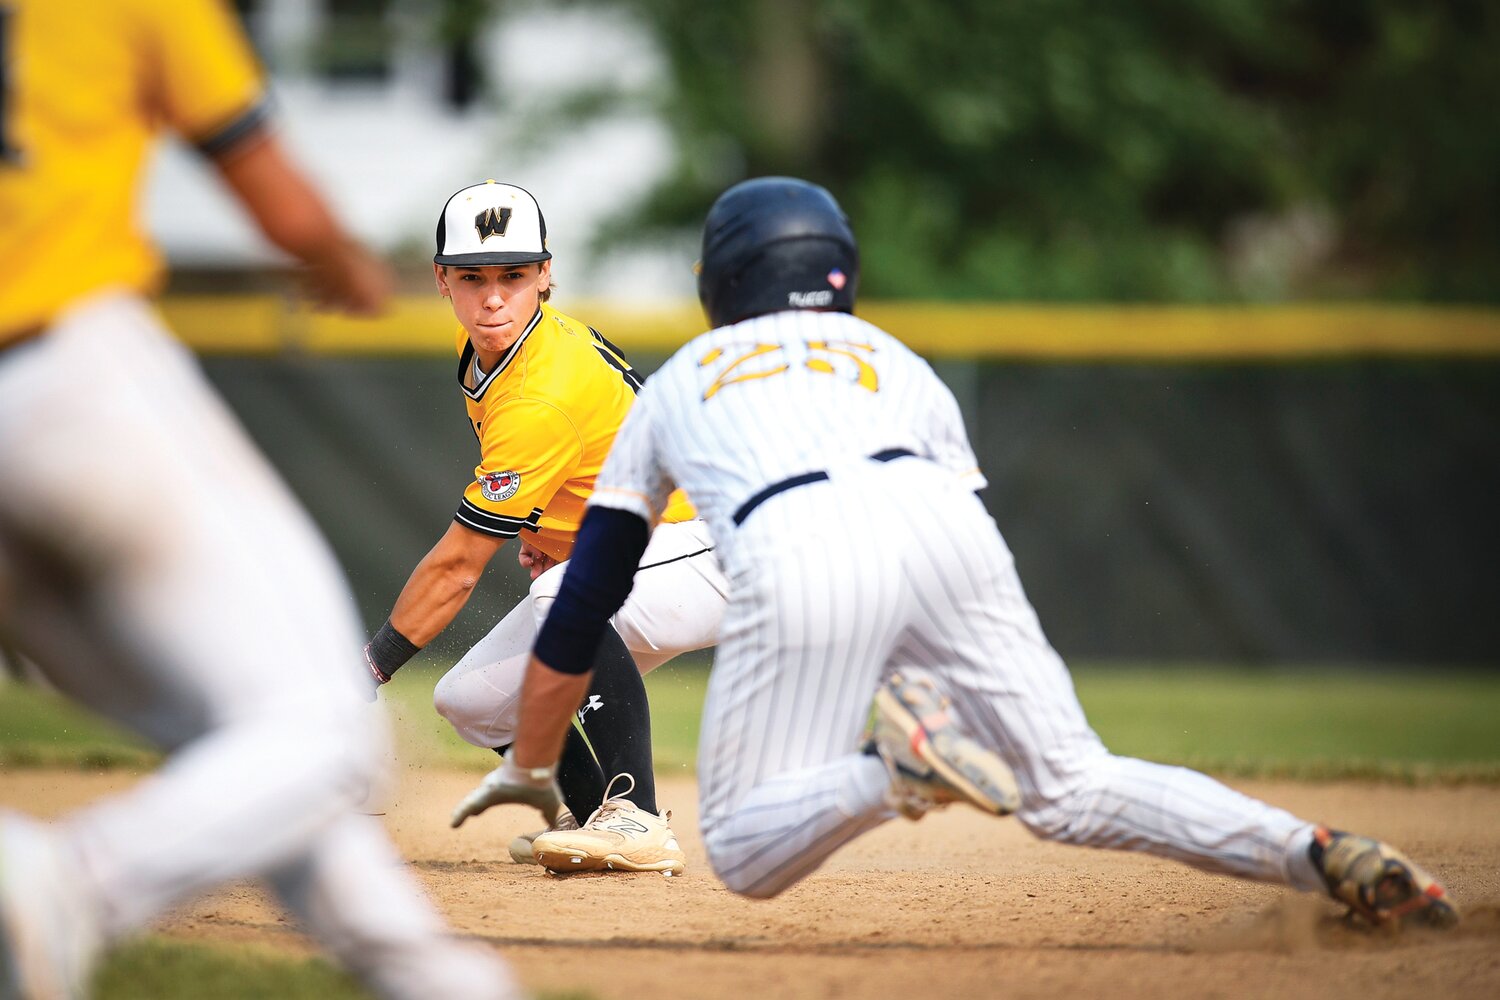 Archbishop Wood second baseman JP DiGuiseppe  fields a throw and tags out Pope John Paul II’s Brendan Kenning after trying to stretch a single into a double in the third inning.